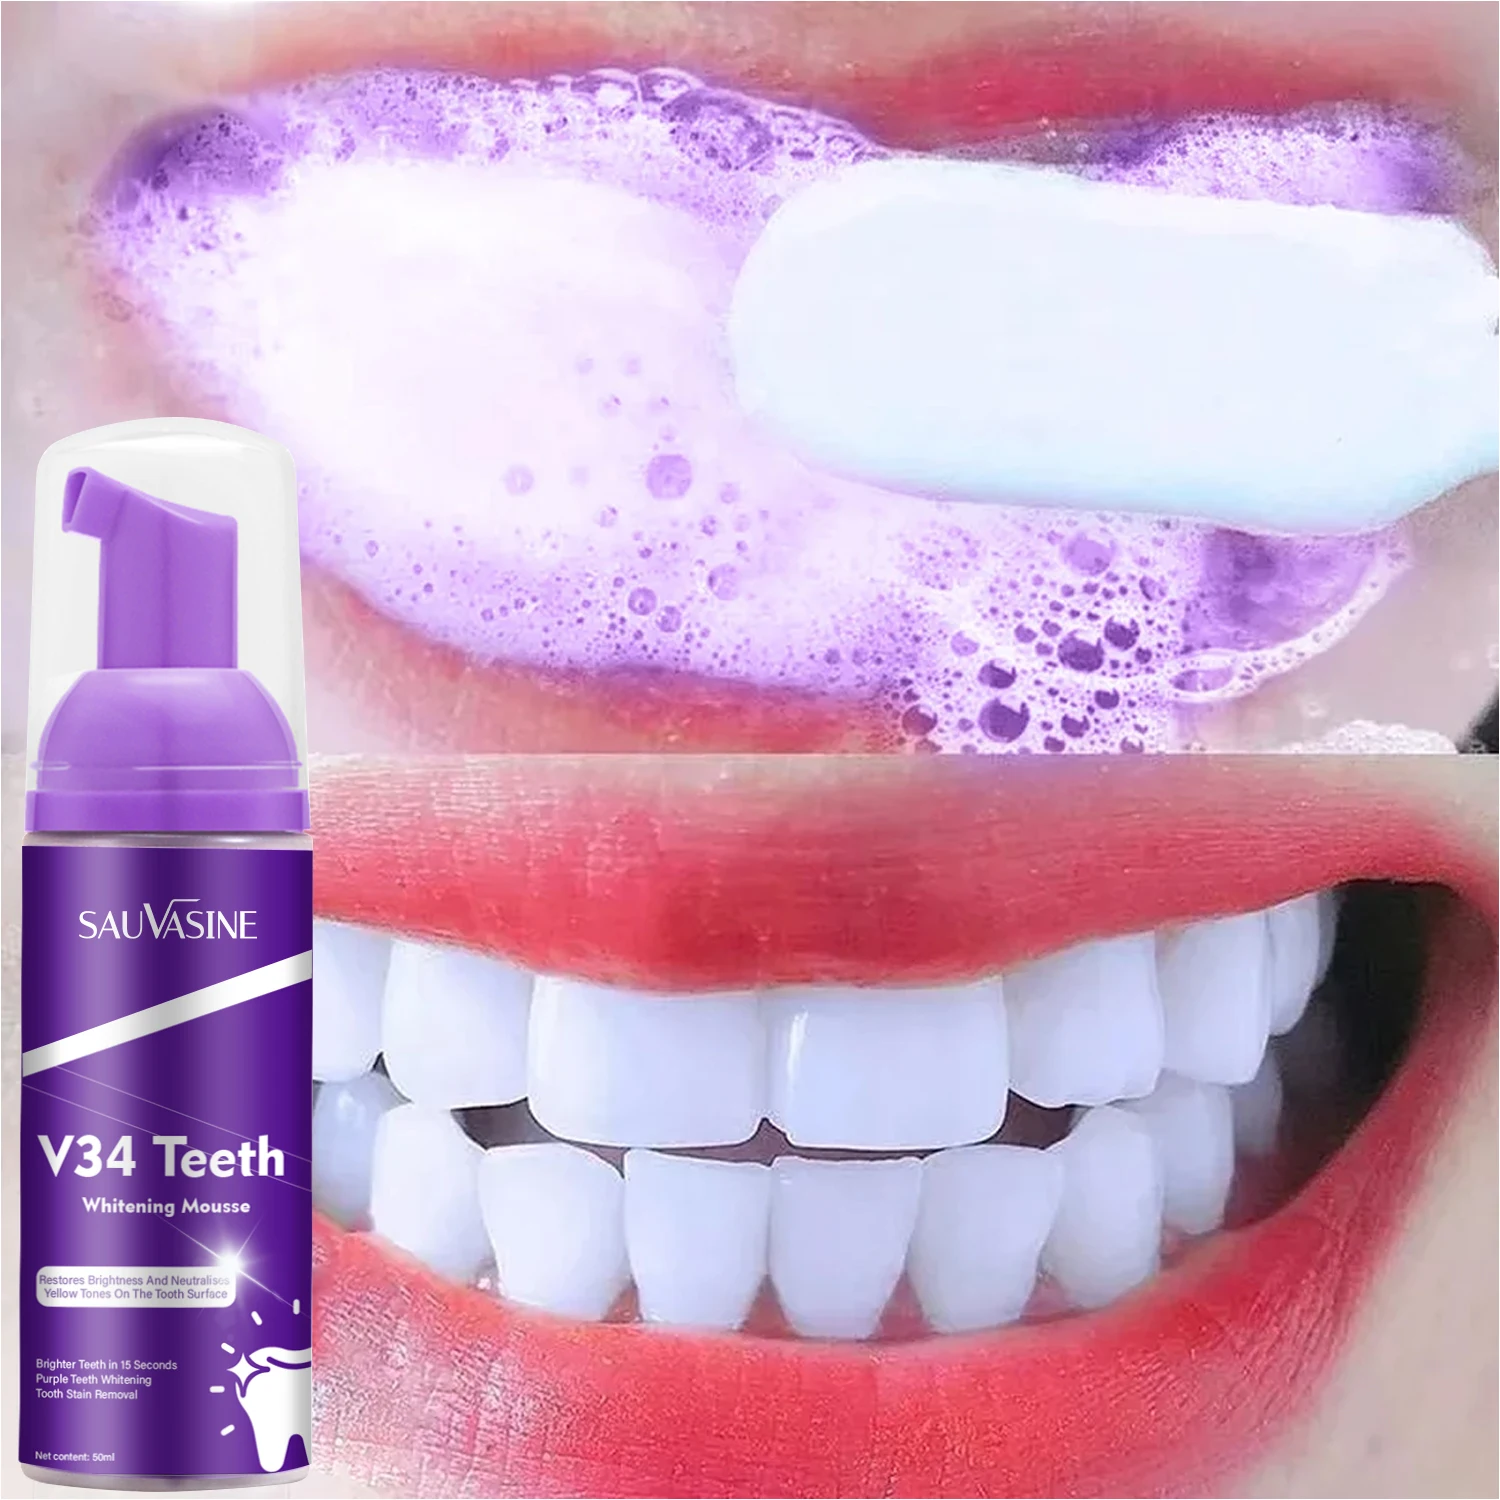 Teeth Whitening Product Effectively Remove Yellow Teeth Smoke Stain Remover Oral Hygiene Clean Dental Plaque Fresh Breath 1pc teeth whitening essence serum powder oral hygiene cleansing remove plaque stains fresh breath oral hygiene dental tools